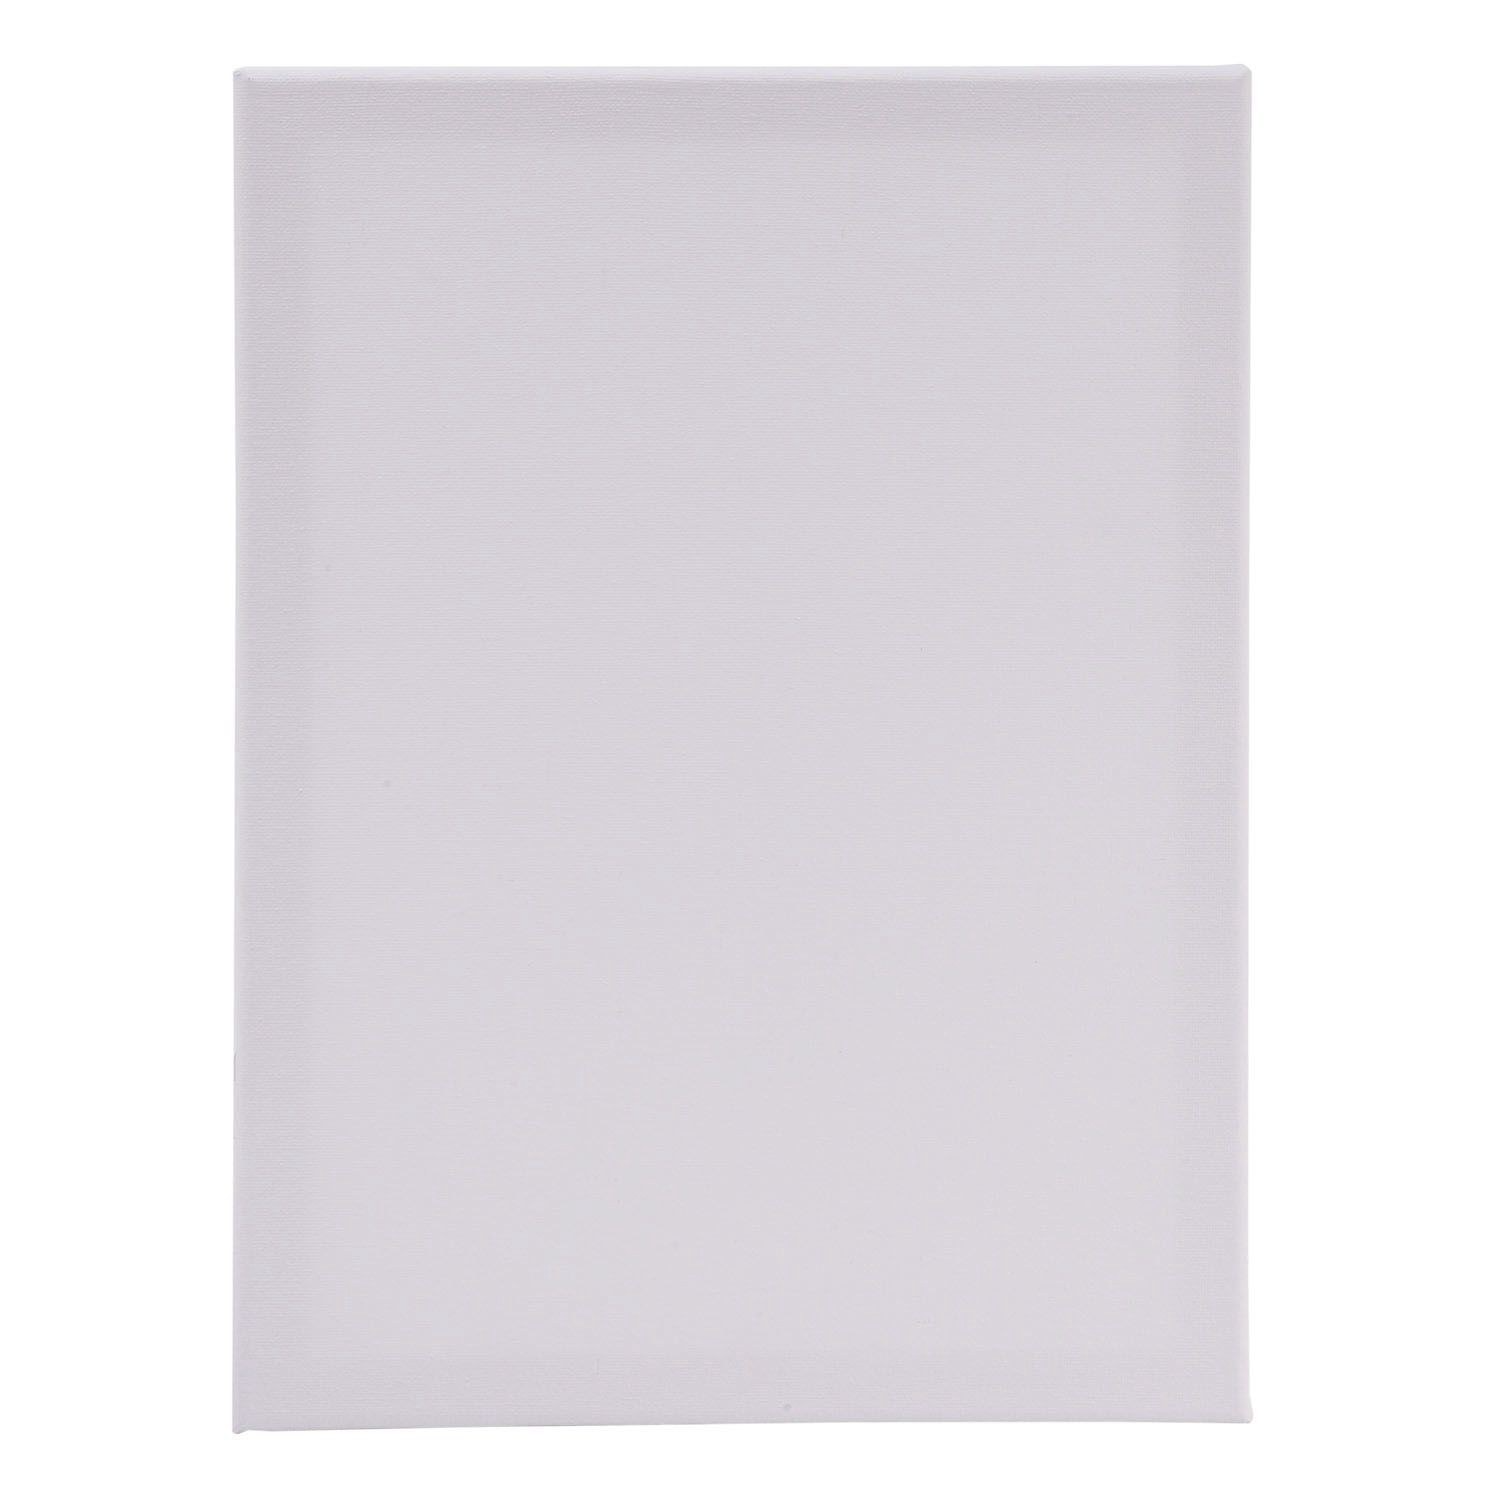 Blank Artist Canvas Art Board Plain Painting Stretched Framed White Large  40x50c